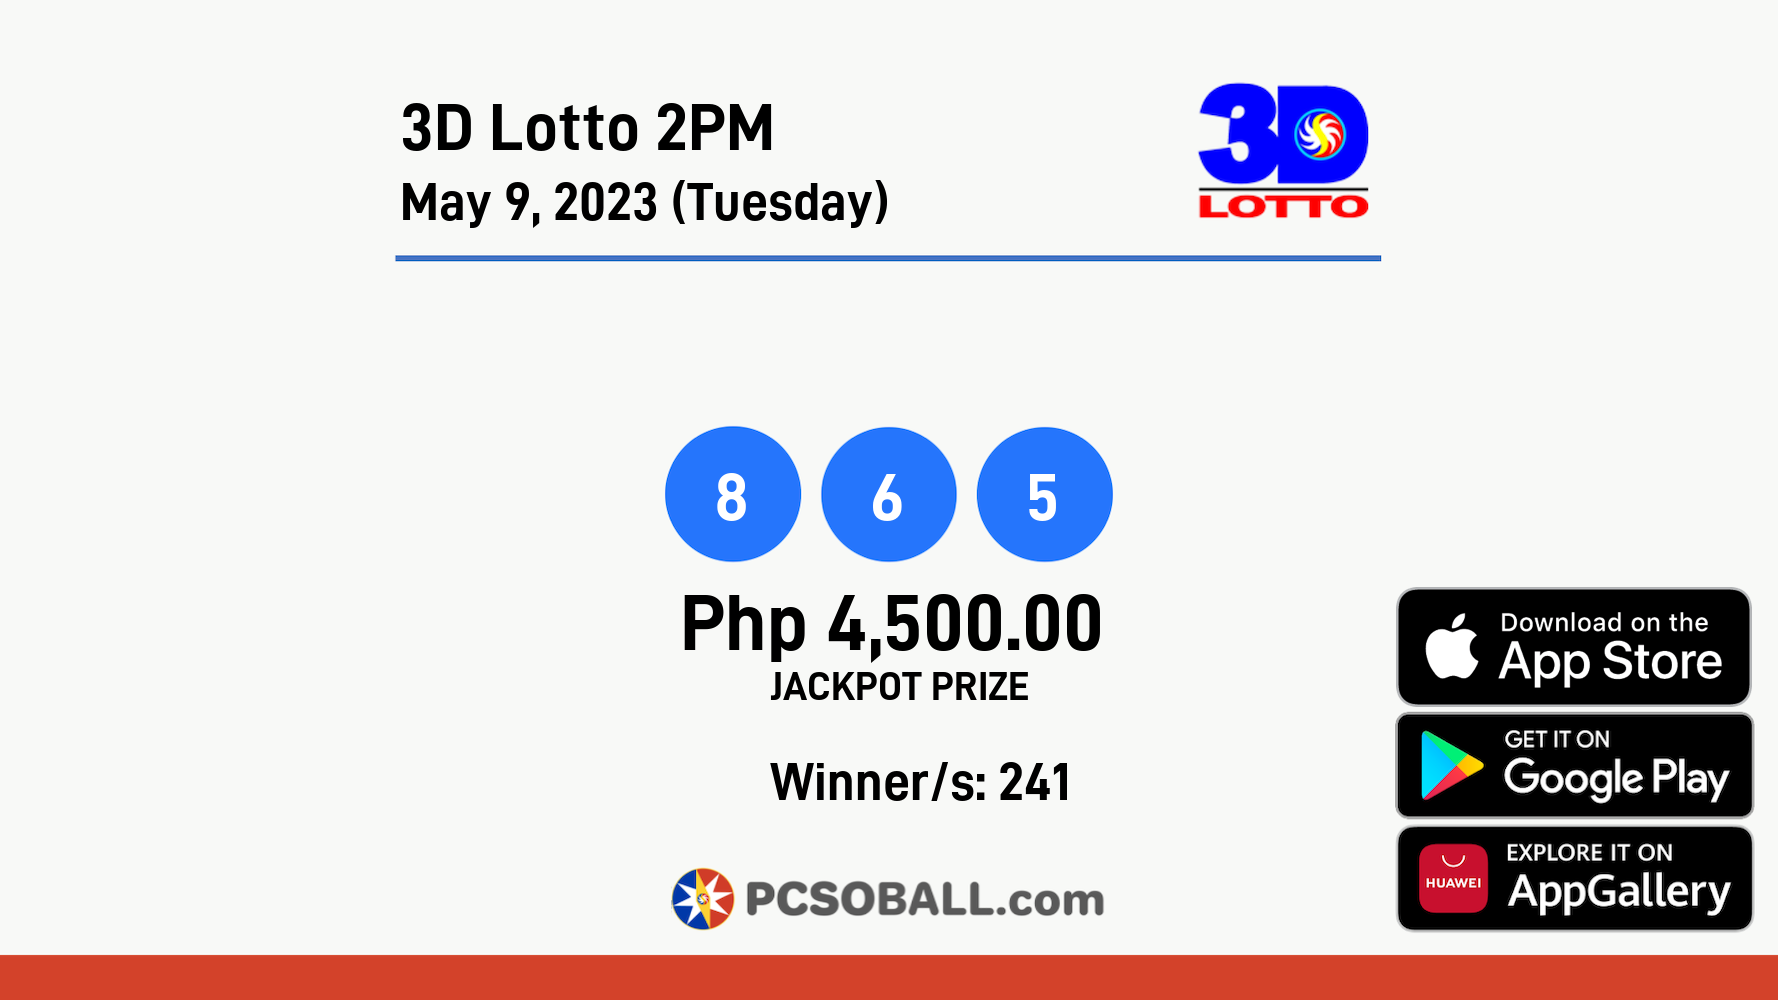 3D Lotto 2PM May 9, 2023 (Tuesday) Result